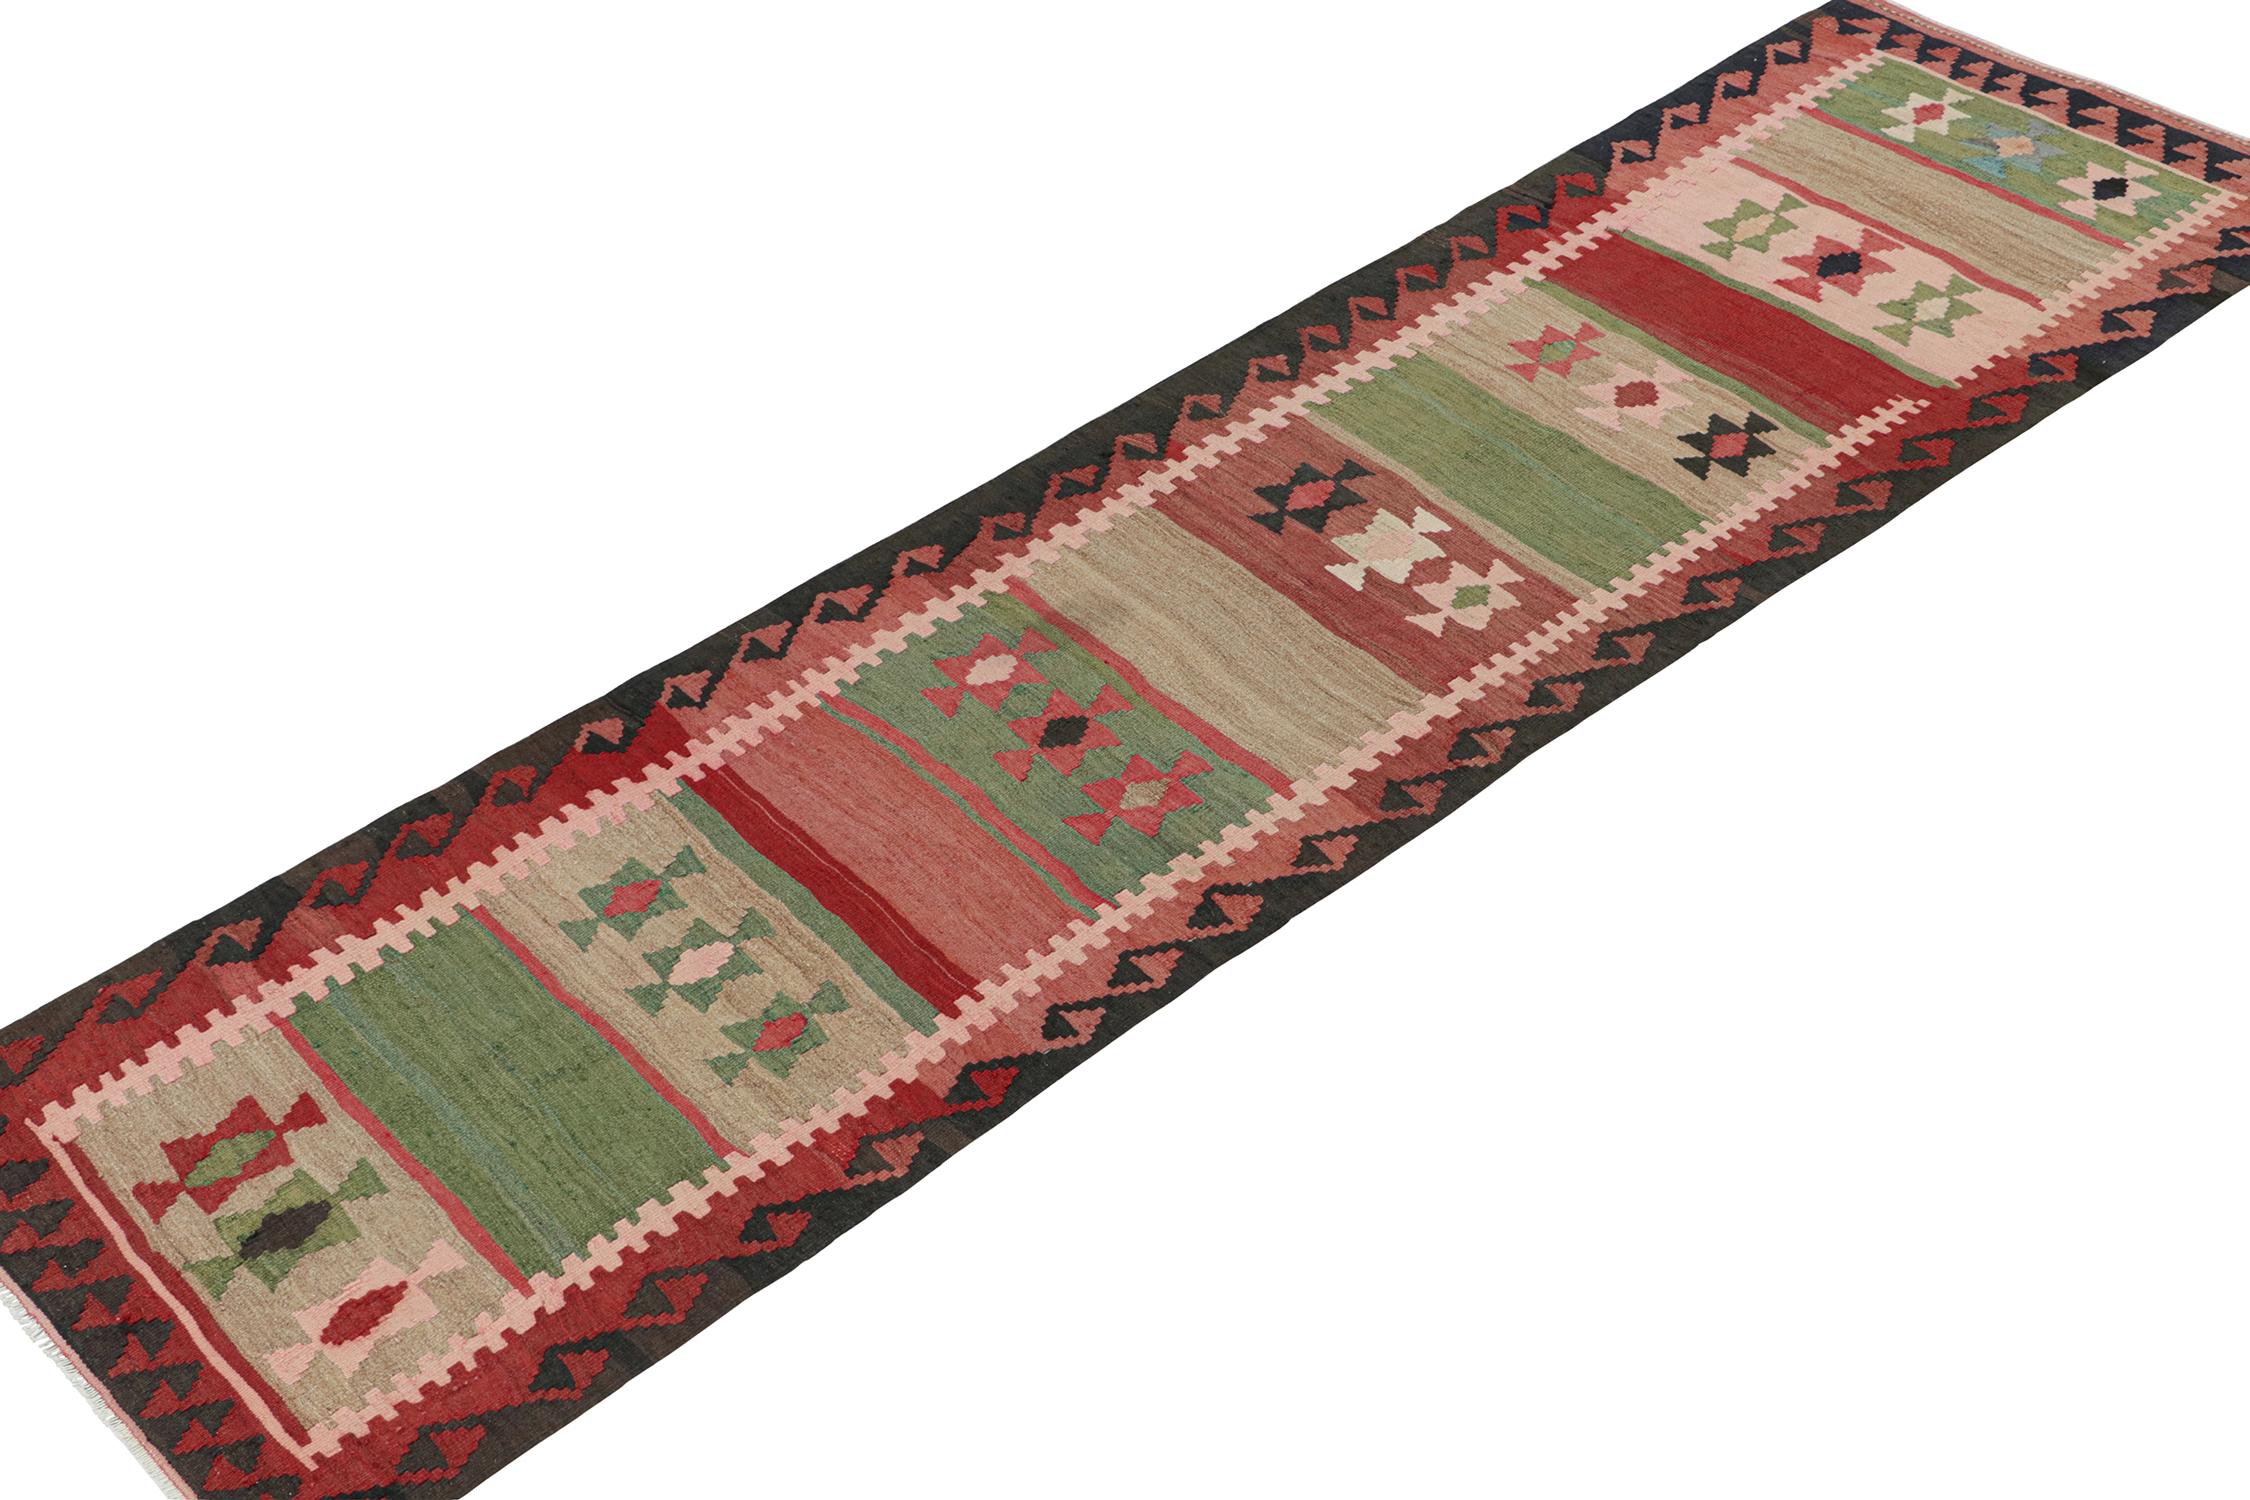 Tribal Vintage Persian Kilim Runner in Polychromatic Geometric Patterns by Rug & Kilim For Sale